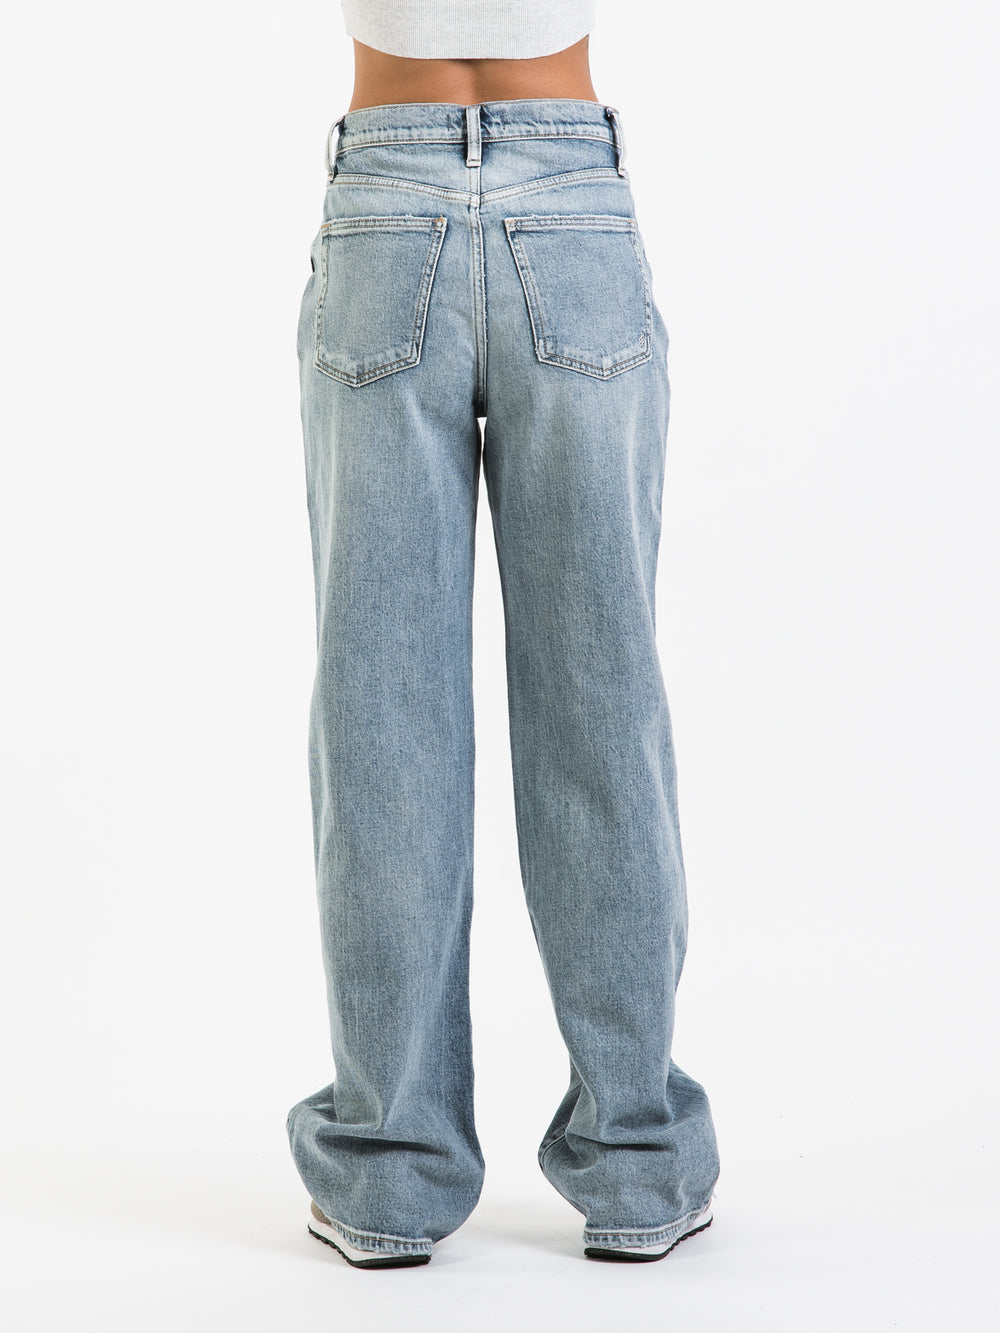 SILVER JEANS 33" HIGHLY DESIRABLE TROUSER - CLEARANCE